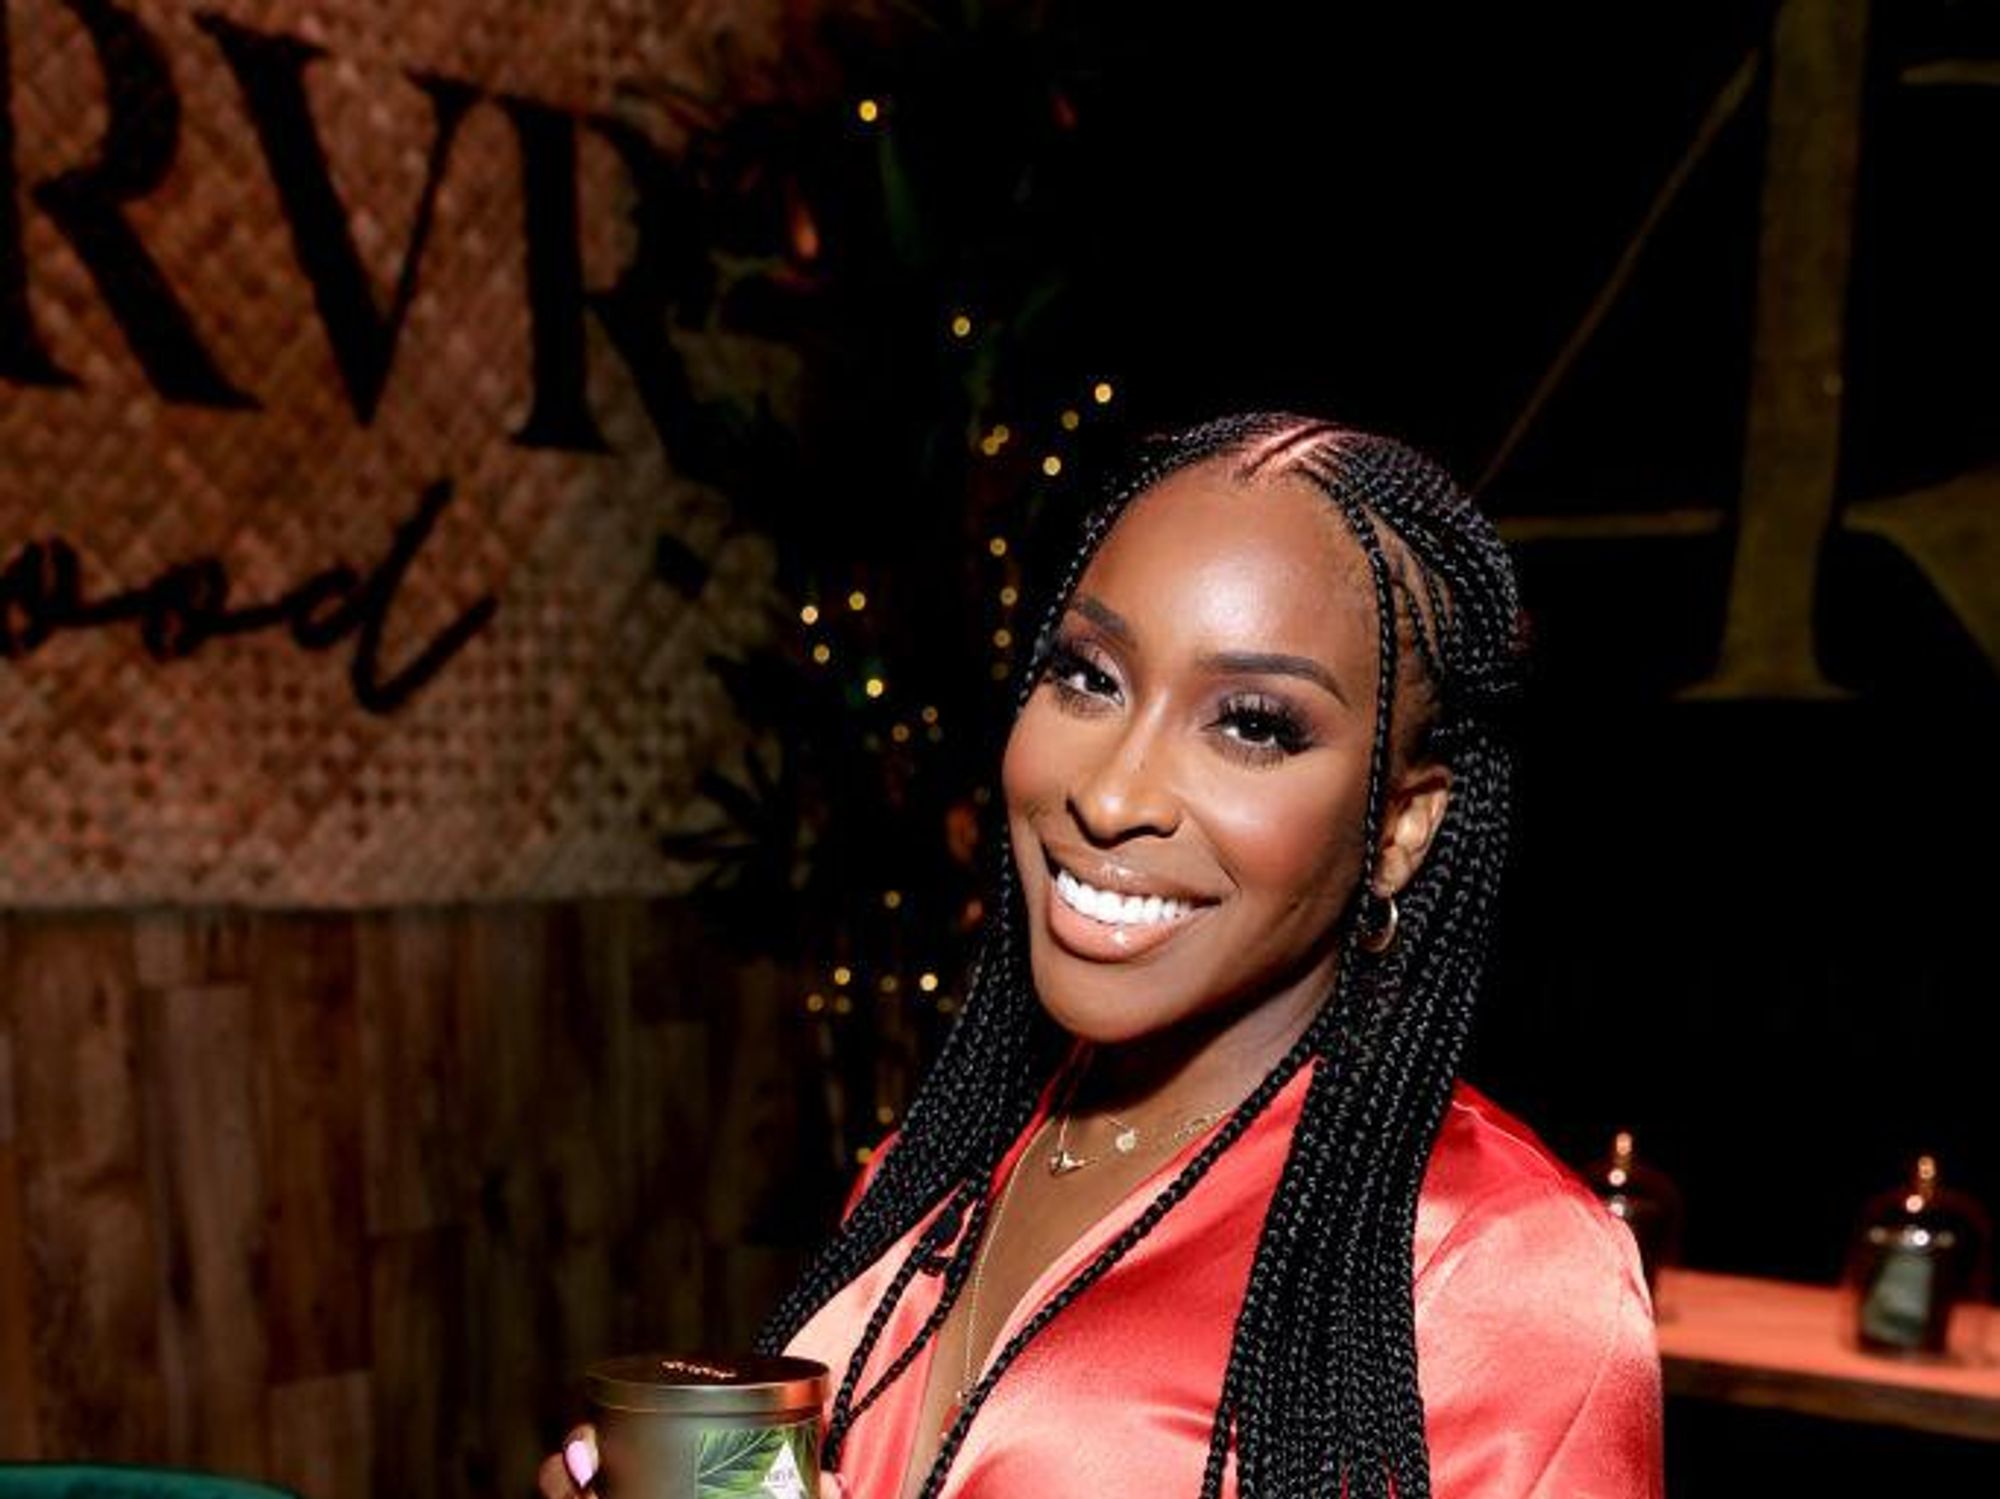 Nigerian-American Jackie Aina Catches Flames For Insensitive New Candle